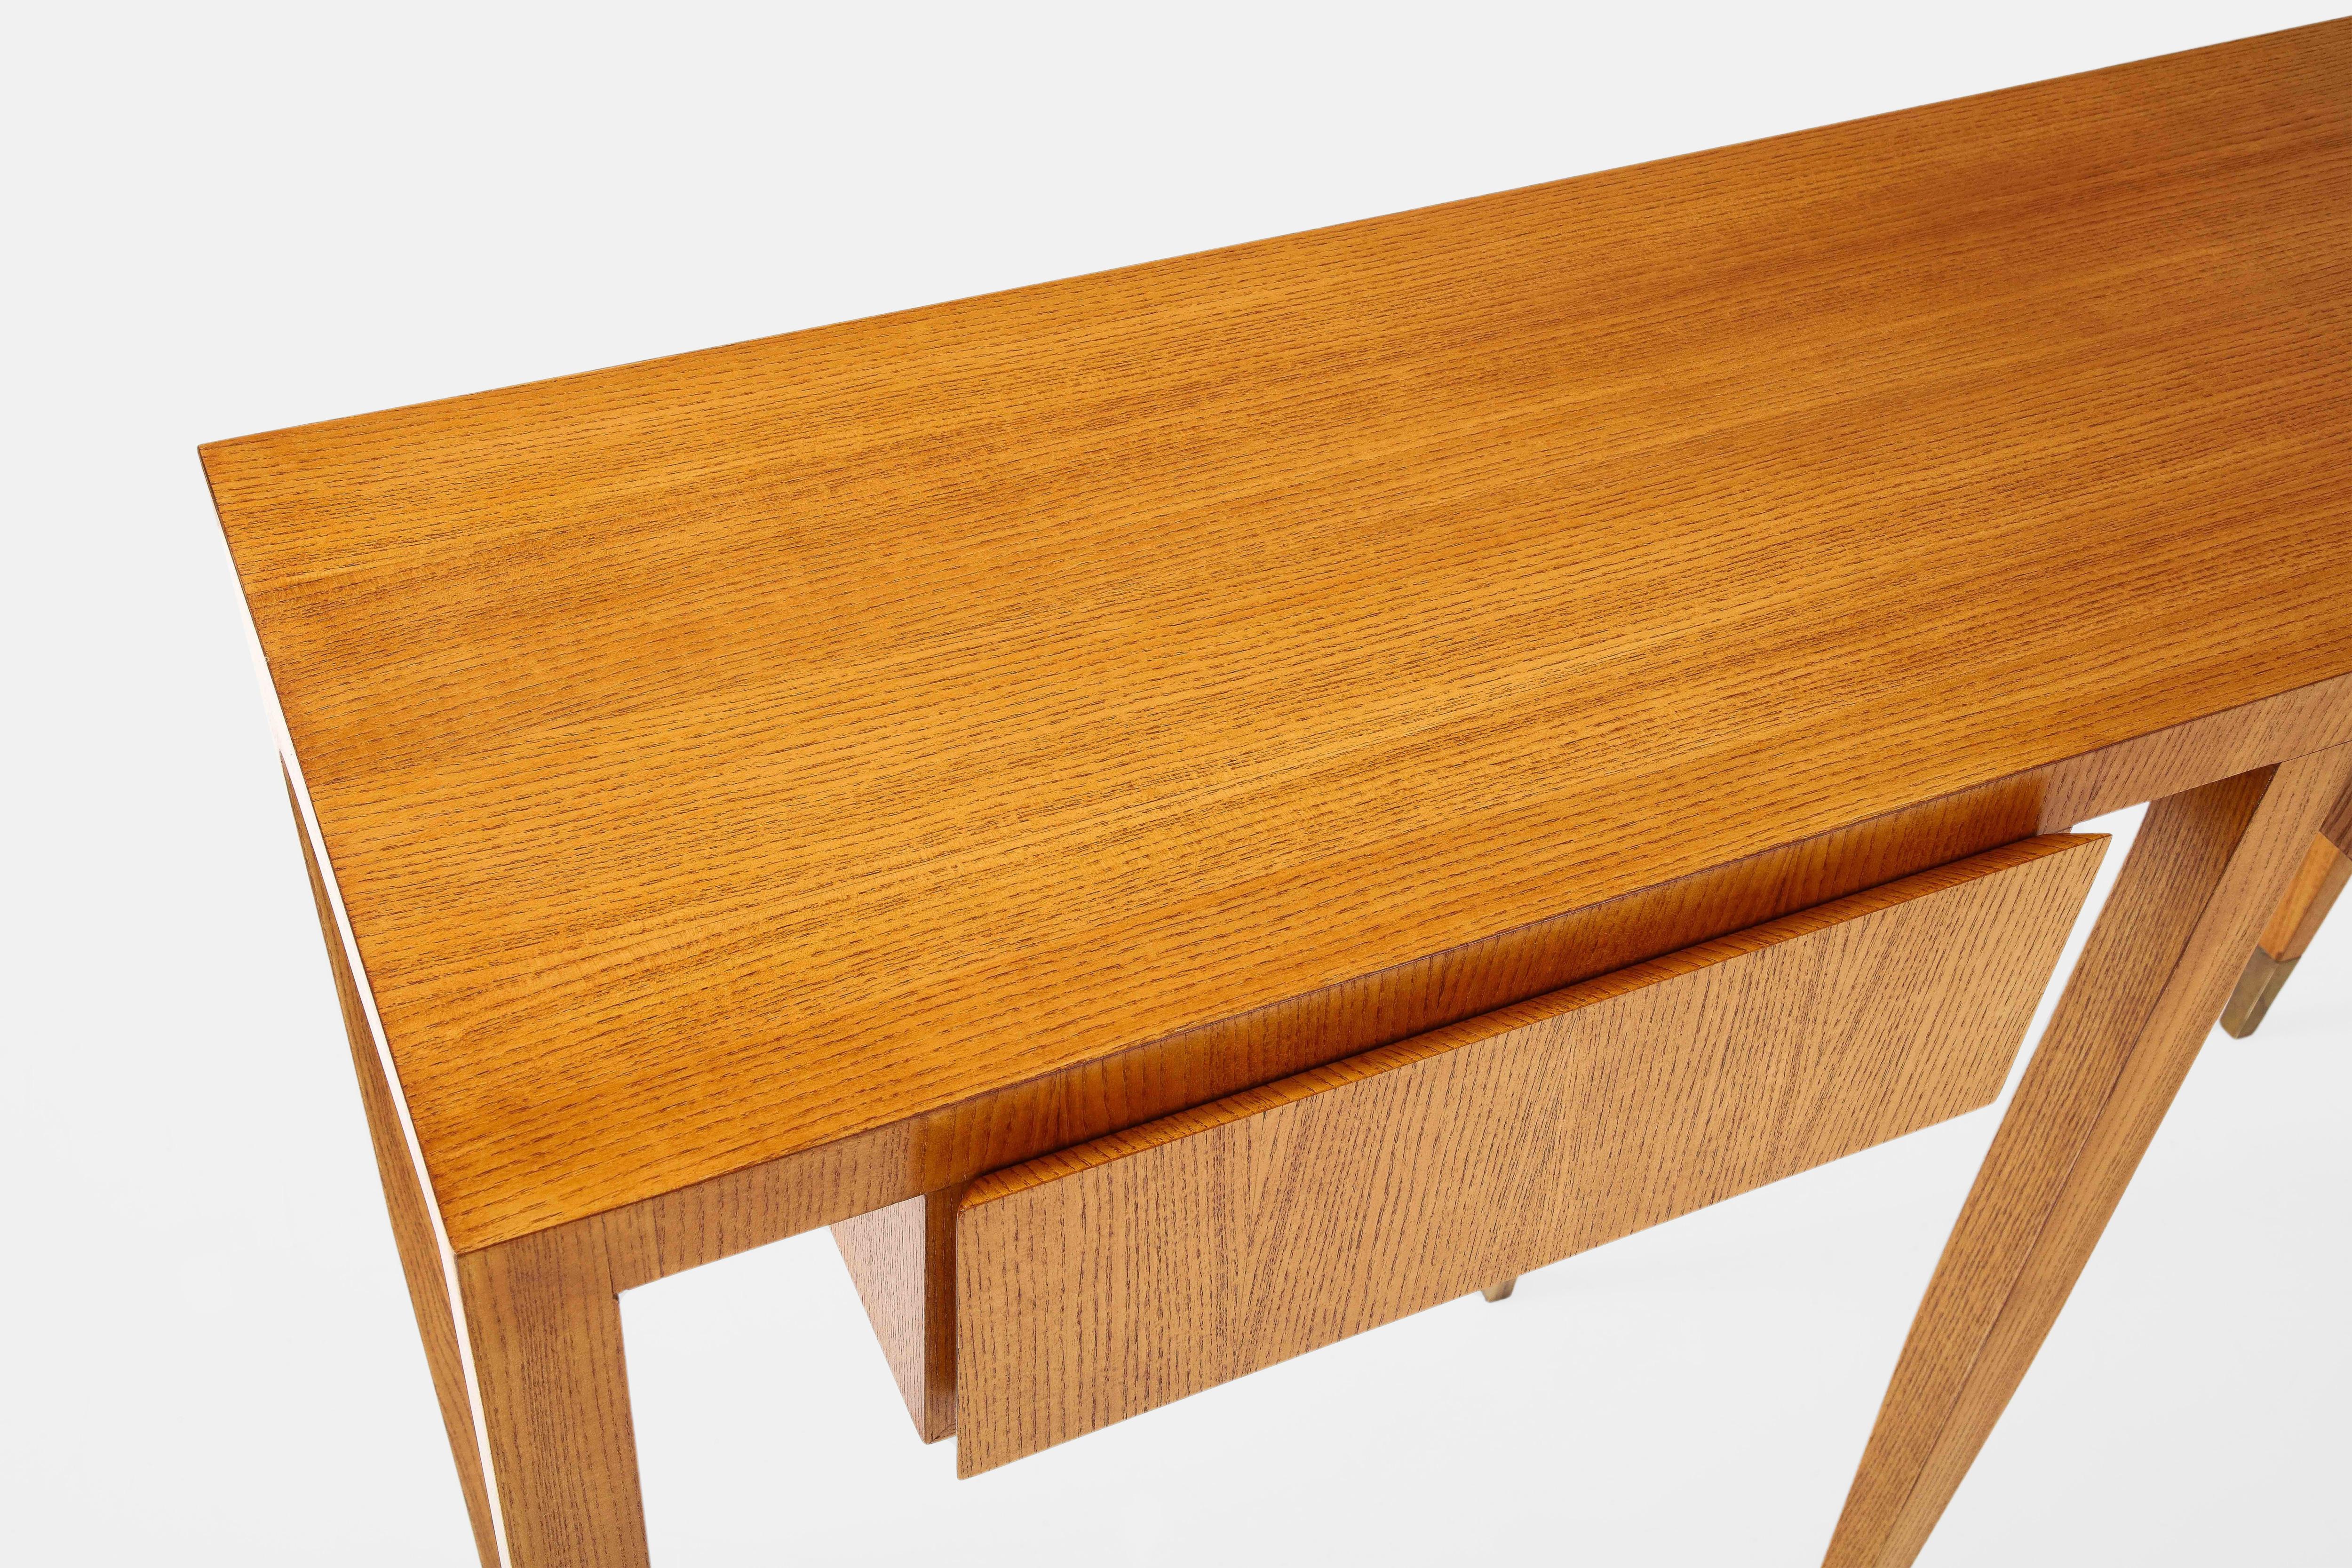 Gio Ponti for Giordano Chiesa Rare Pair of Ash Wood Consoles, Italy, 1950s For Sale 4